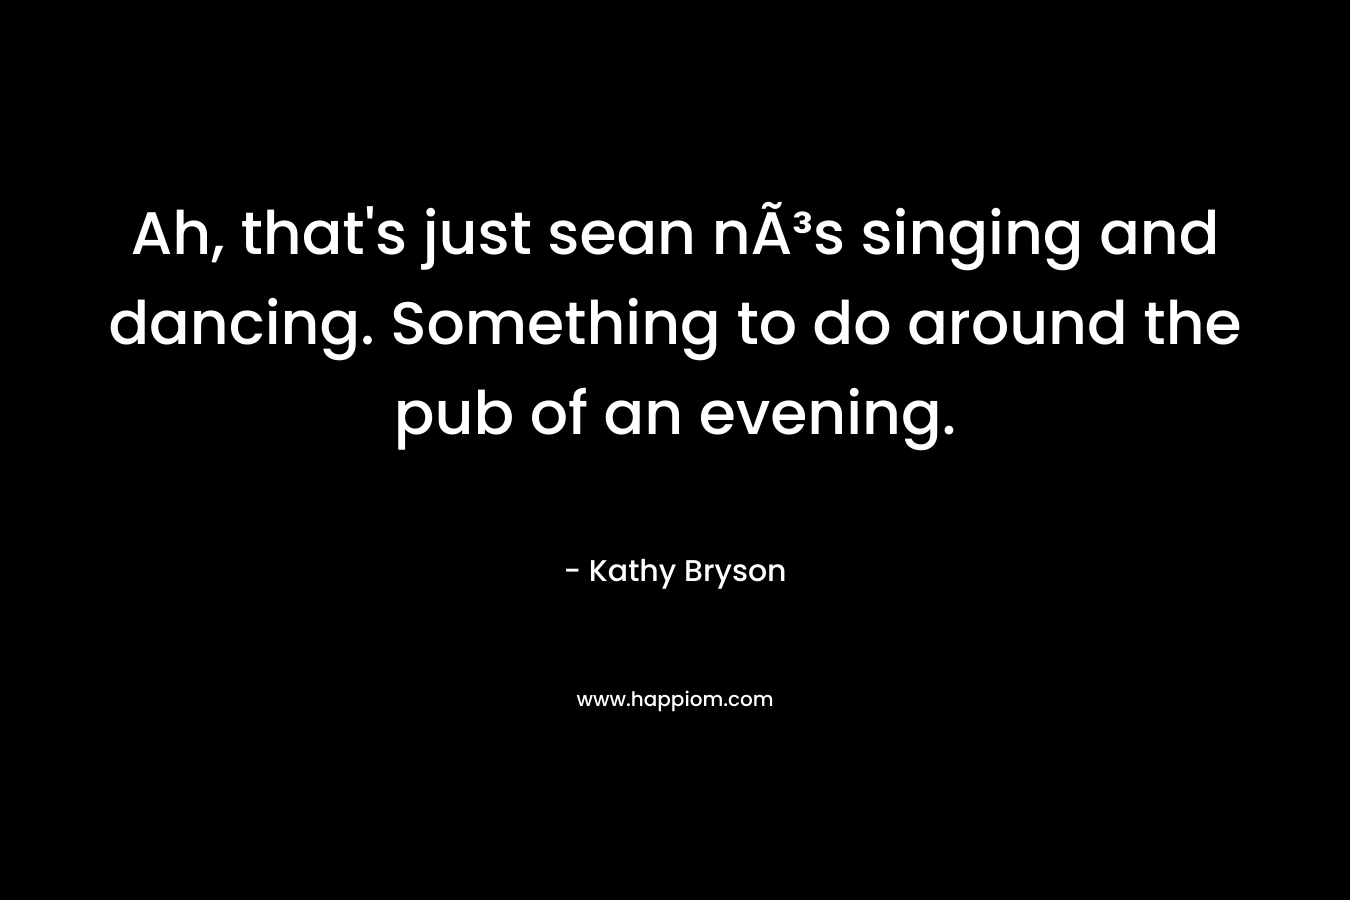 Ah, that's just sean nÃ³s singing and dancing. Something to do around the pub of an evening.